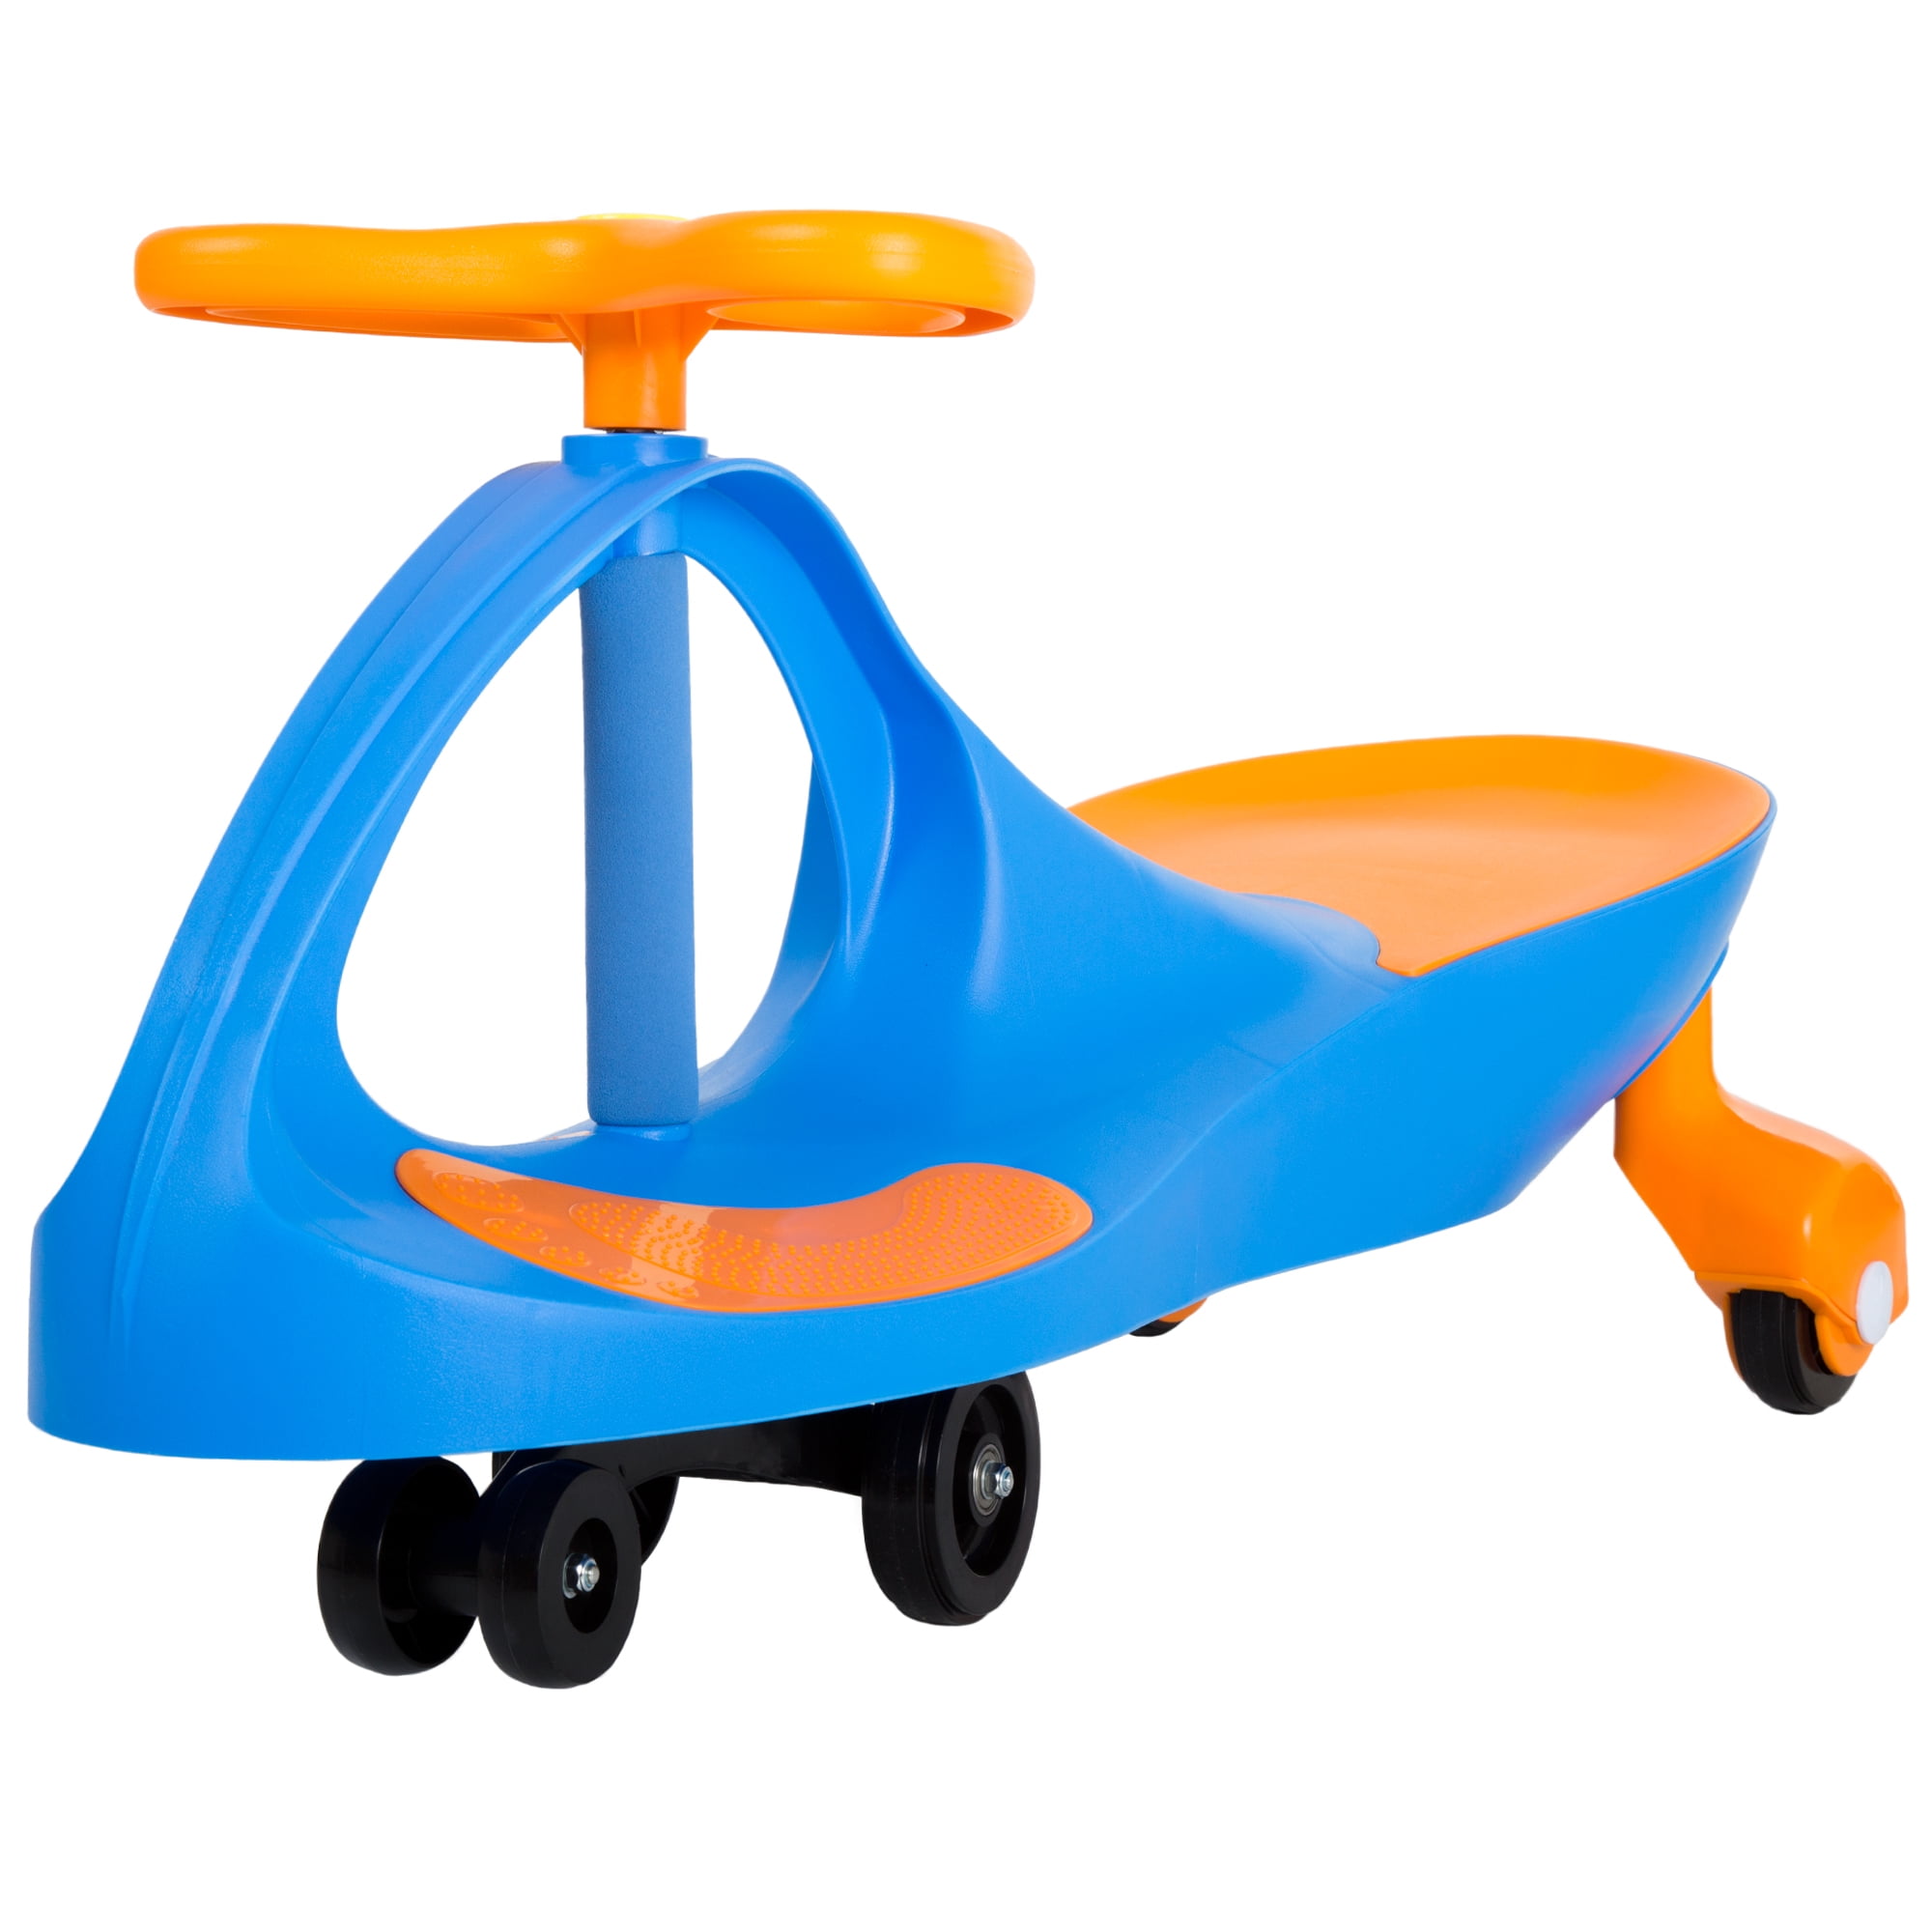 Colorful Ride on Toy Wiggling Ride on Toy for Girls Boys 2-6 Yrs Old Roller  Coaster Twisting, 1 unit - Kroger